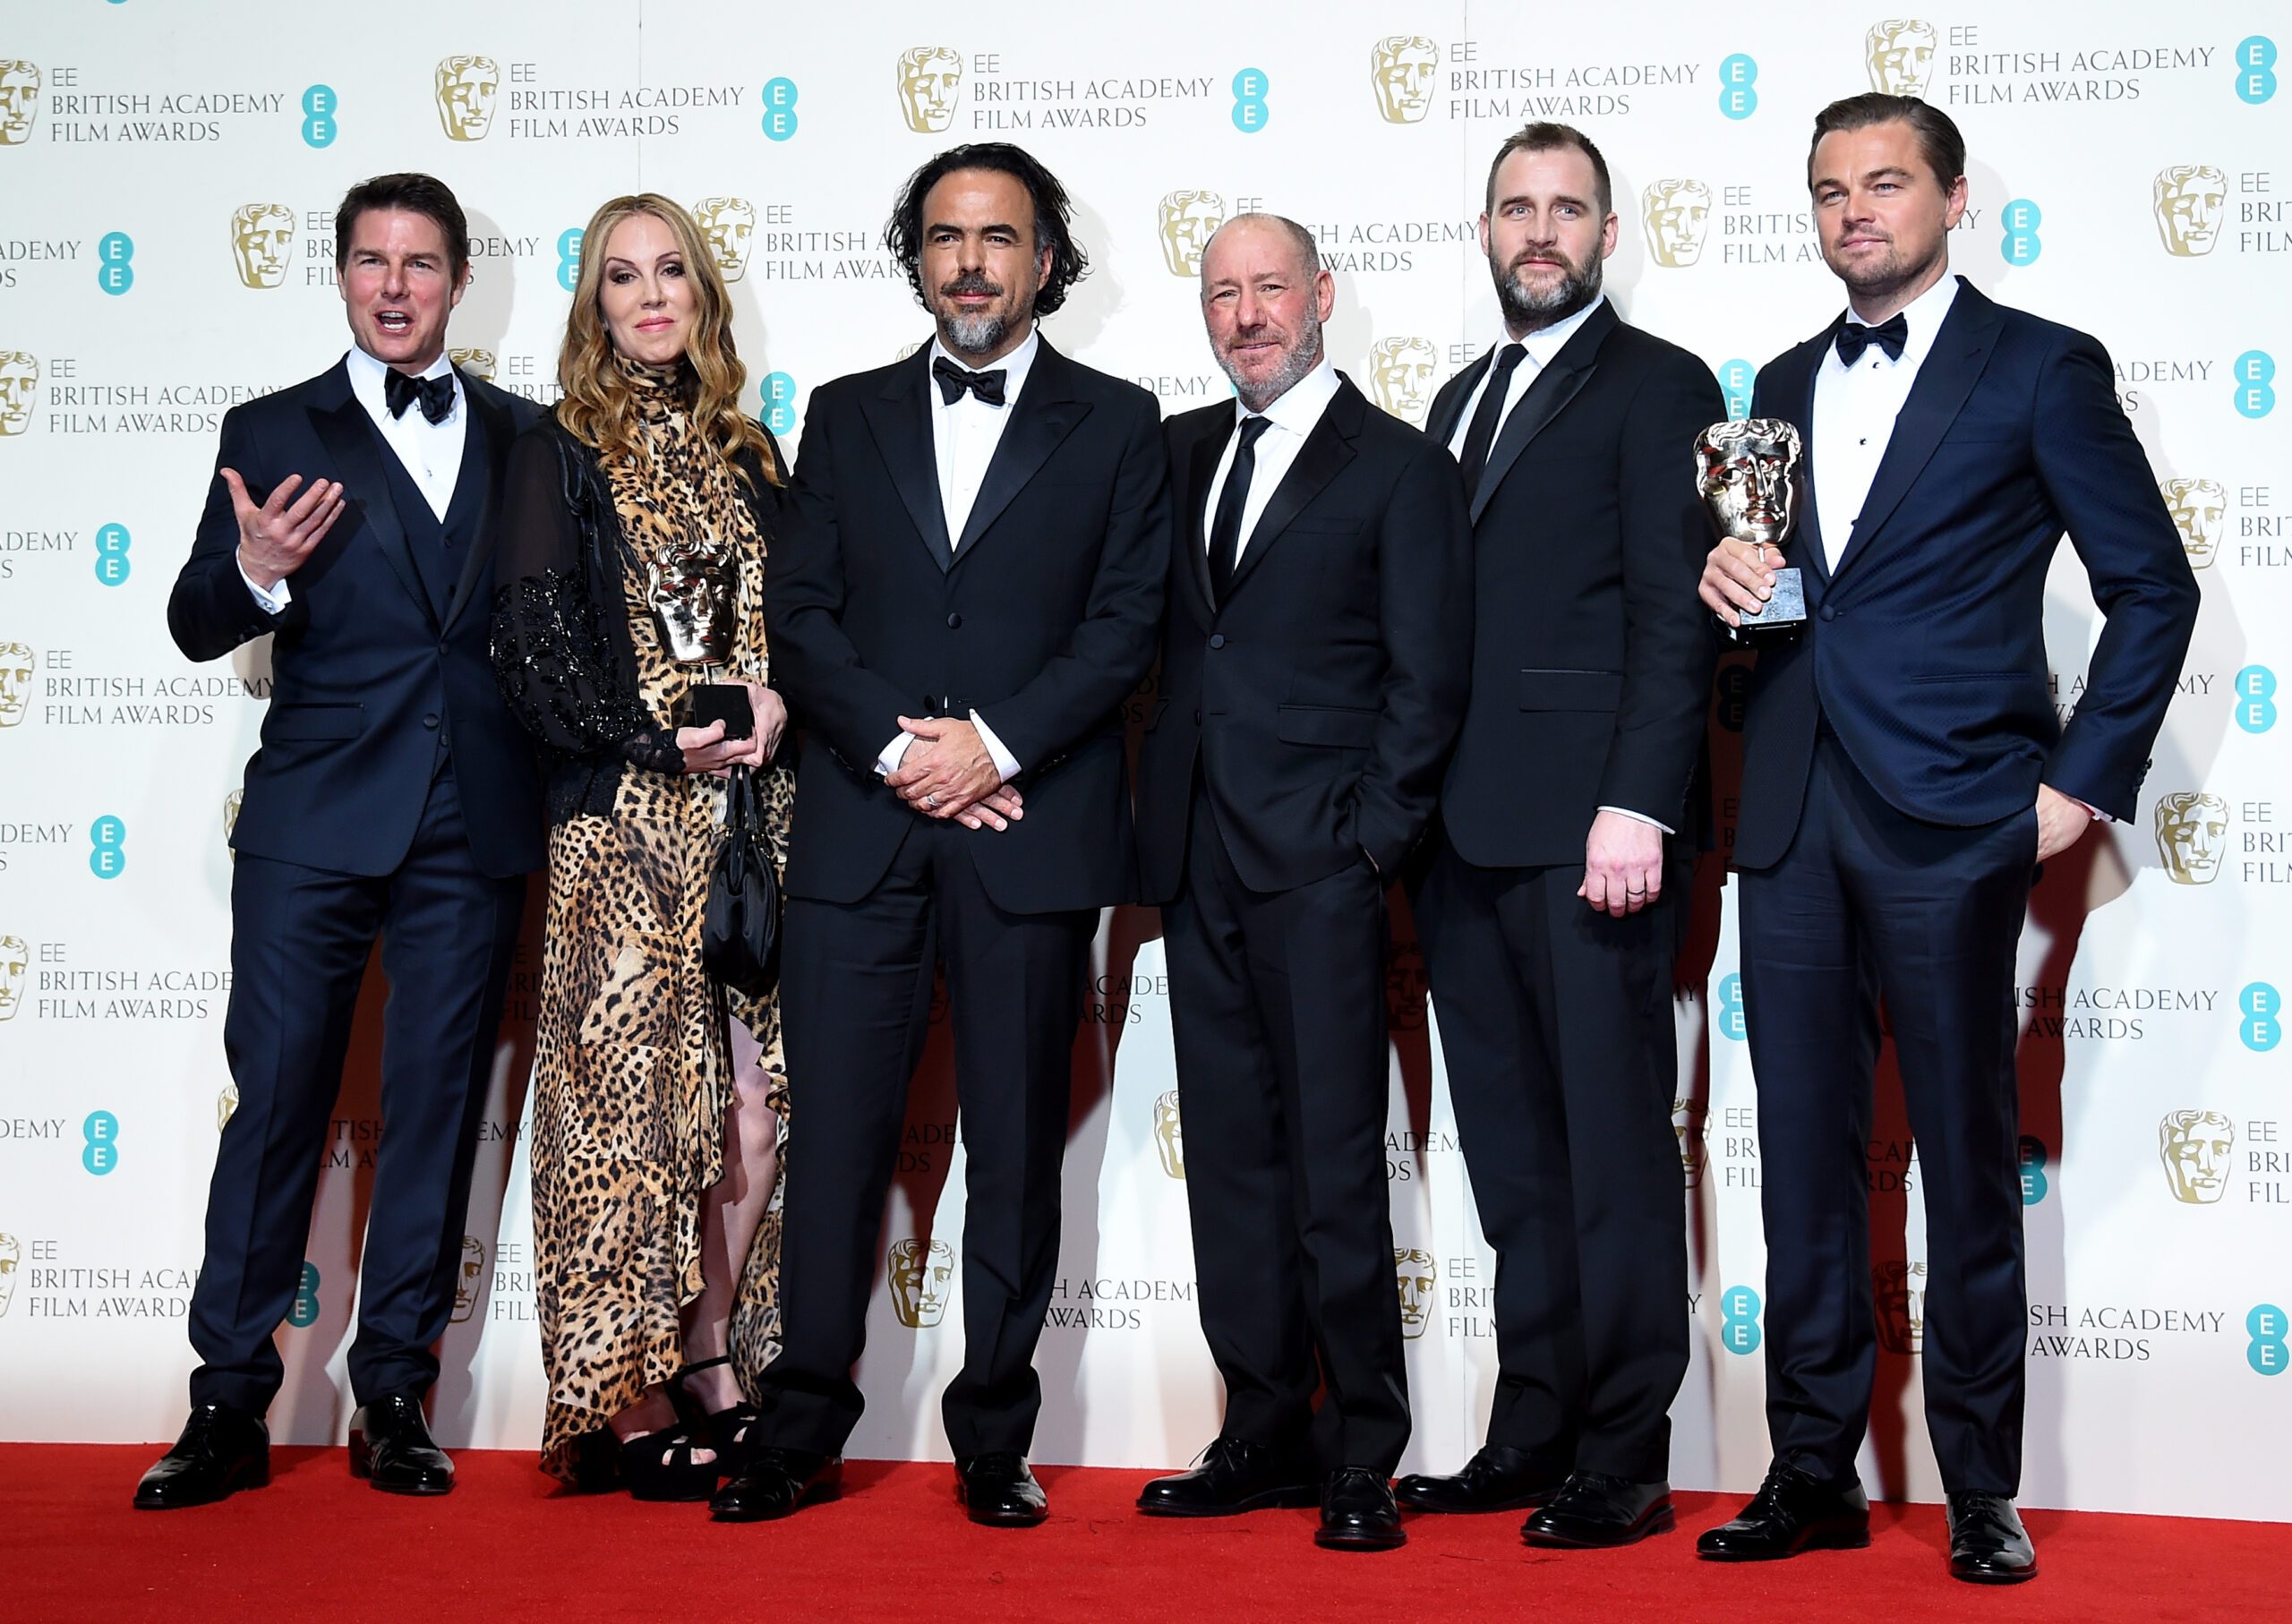 ‘The Revenant’ sweeps Britain’s Baftas with 3 top awards